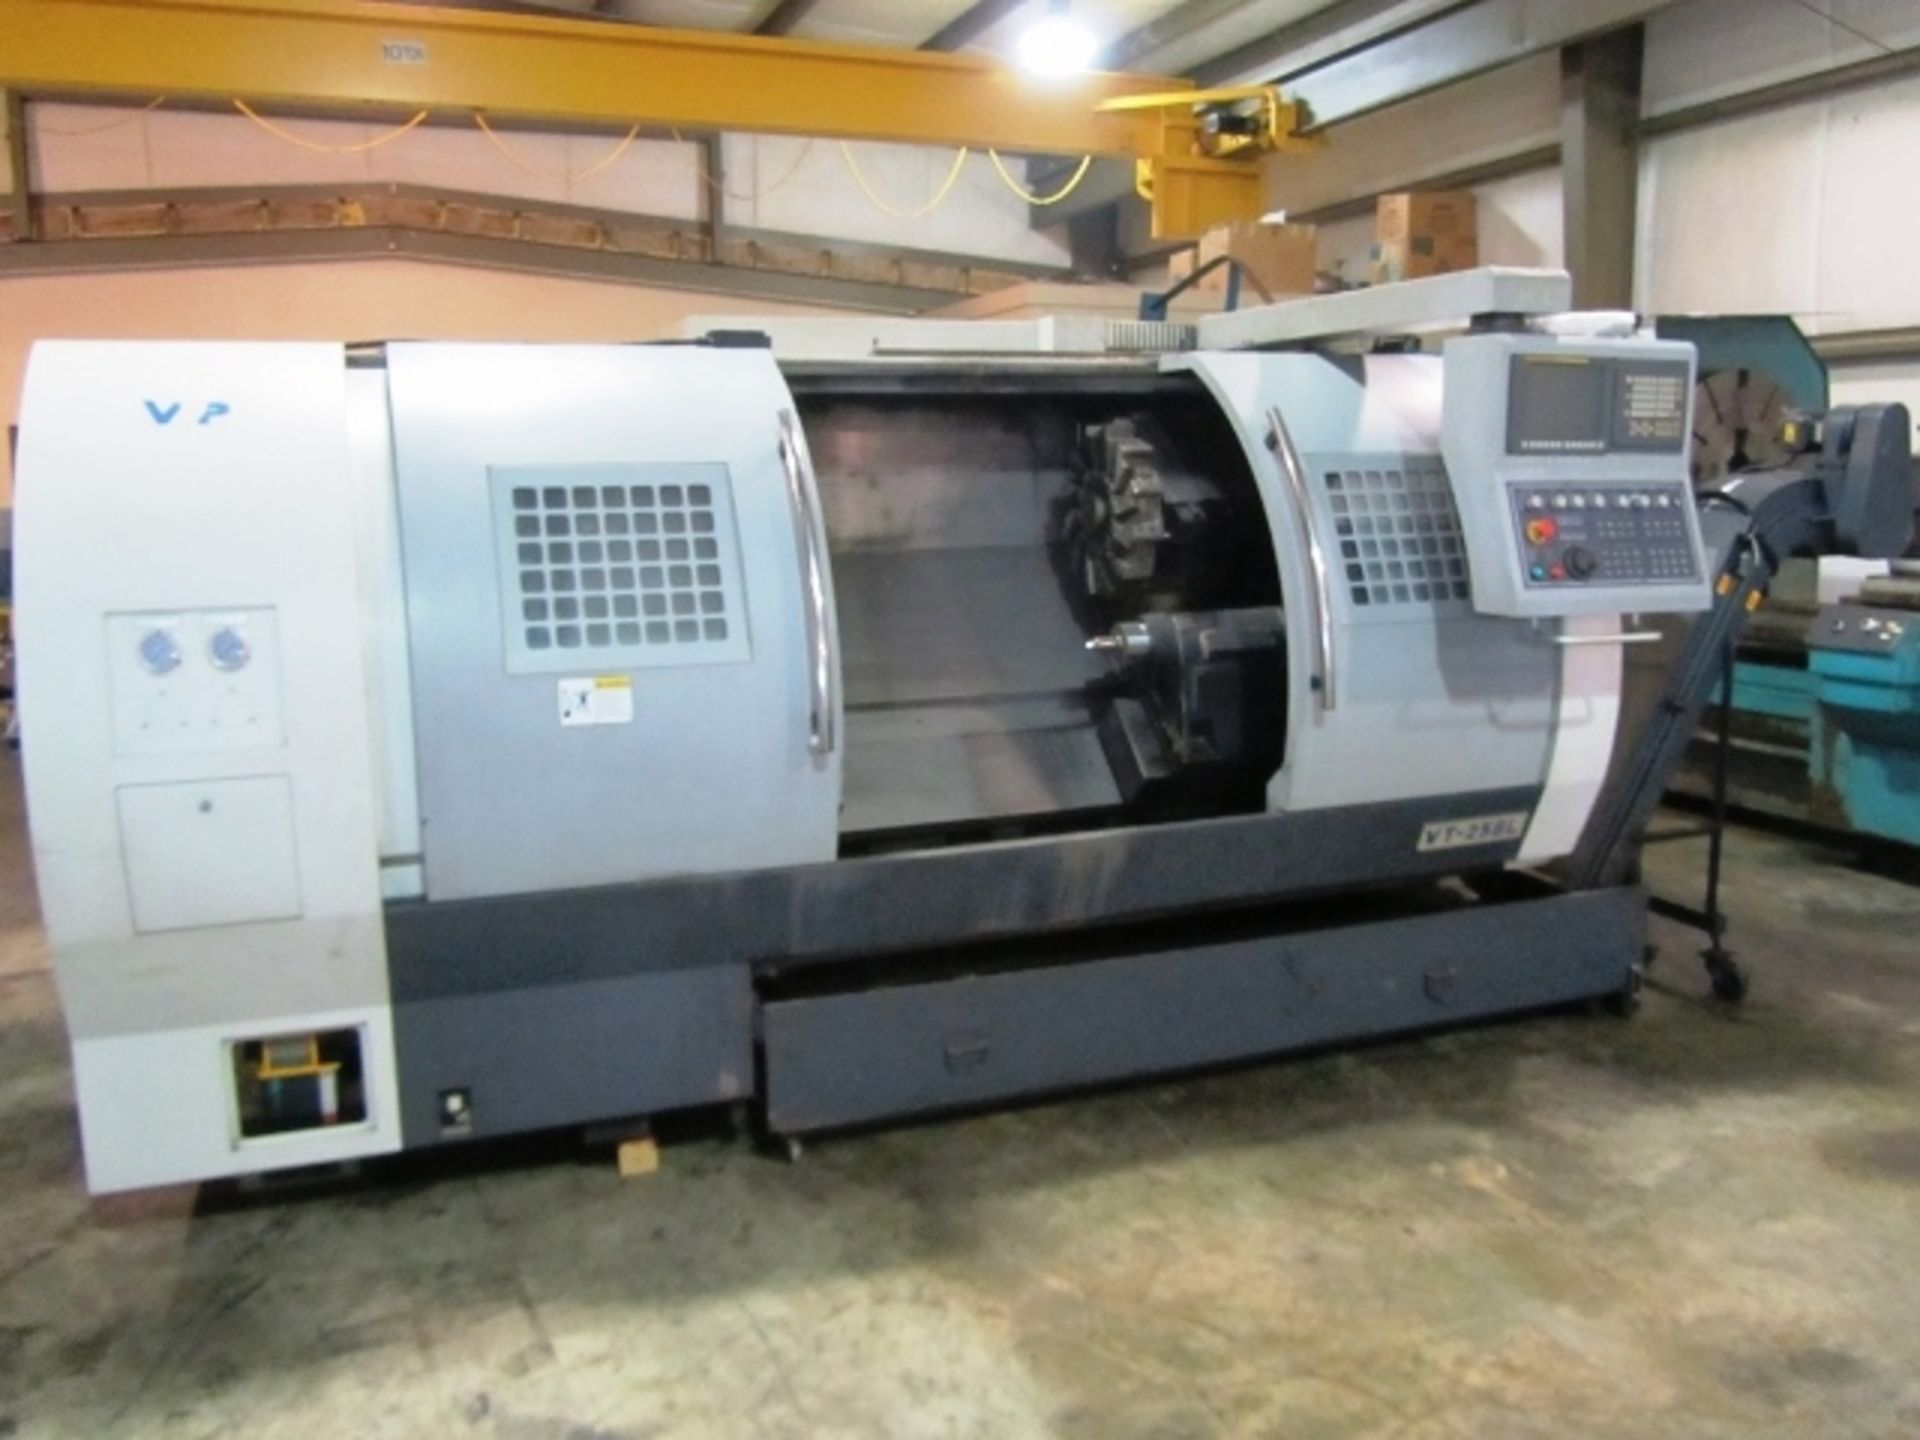 Mighty Viper Model VT25-BL CNC Turning Center with 10" 3-Jaw Power Chuck, 41" Maximum Turning Length